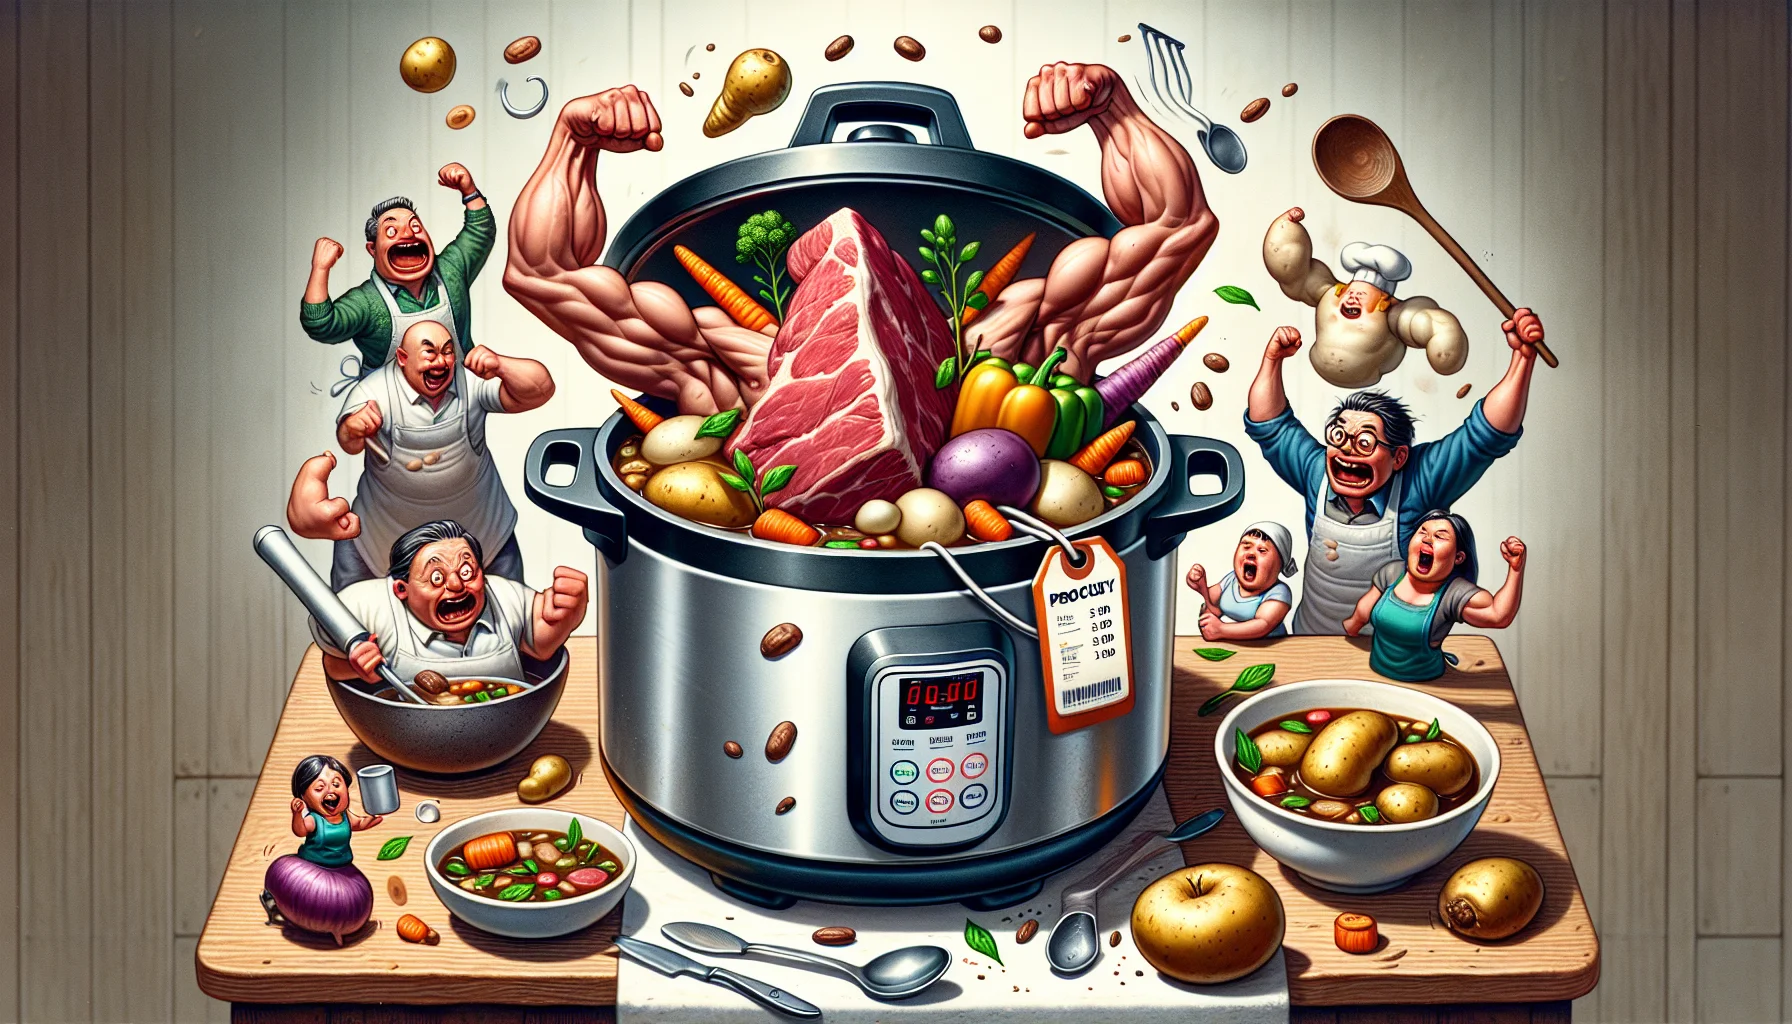 Detailed image of a humorous scene centred on making beef stew with a pressure cooker: The scene shows a pressure cooker on a budget-friendly kitchen counter. Inside the cooker, miniaturized cartoon-style food items, including chunks of beef, carrots, potatoes and herbs all appear to be joyfully diving in. The beef is depicted as flexing its muscles to reflect high protein content, while the vegetables show off their bright colours signifying rich nutrients. A small tag price label hangs from the pressure cooker showing a surprisingly low cost. Amused home cooks of various genders and descents look on eagerly, ready with bowls and spoons in their hands.